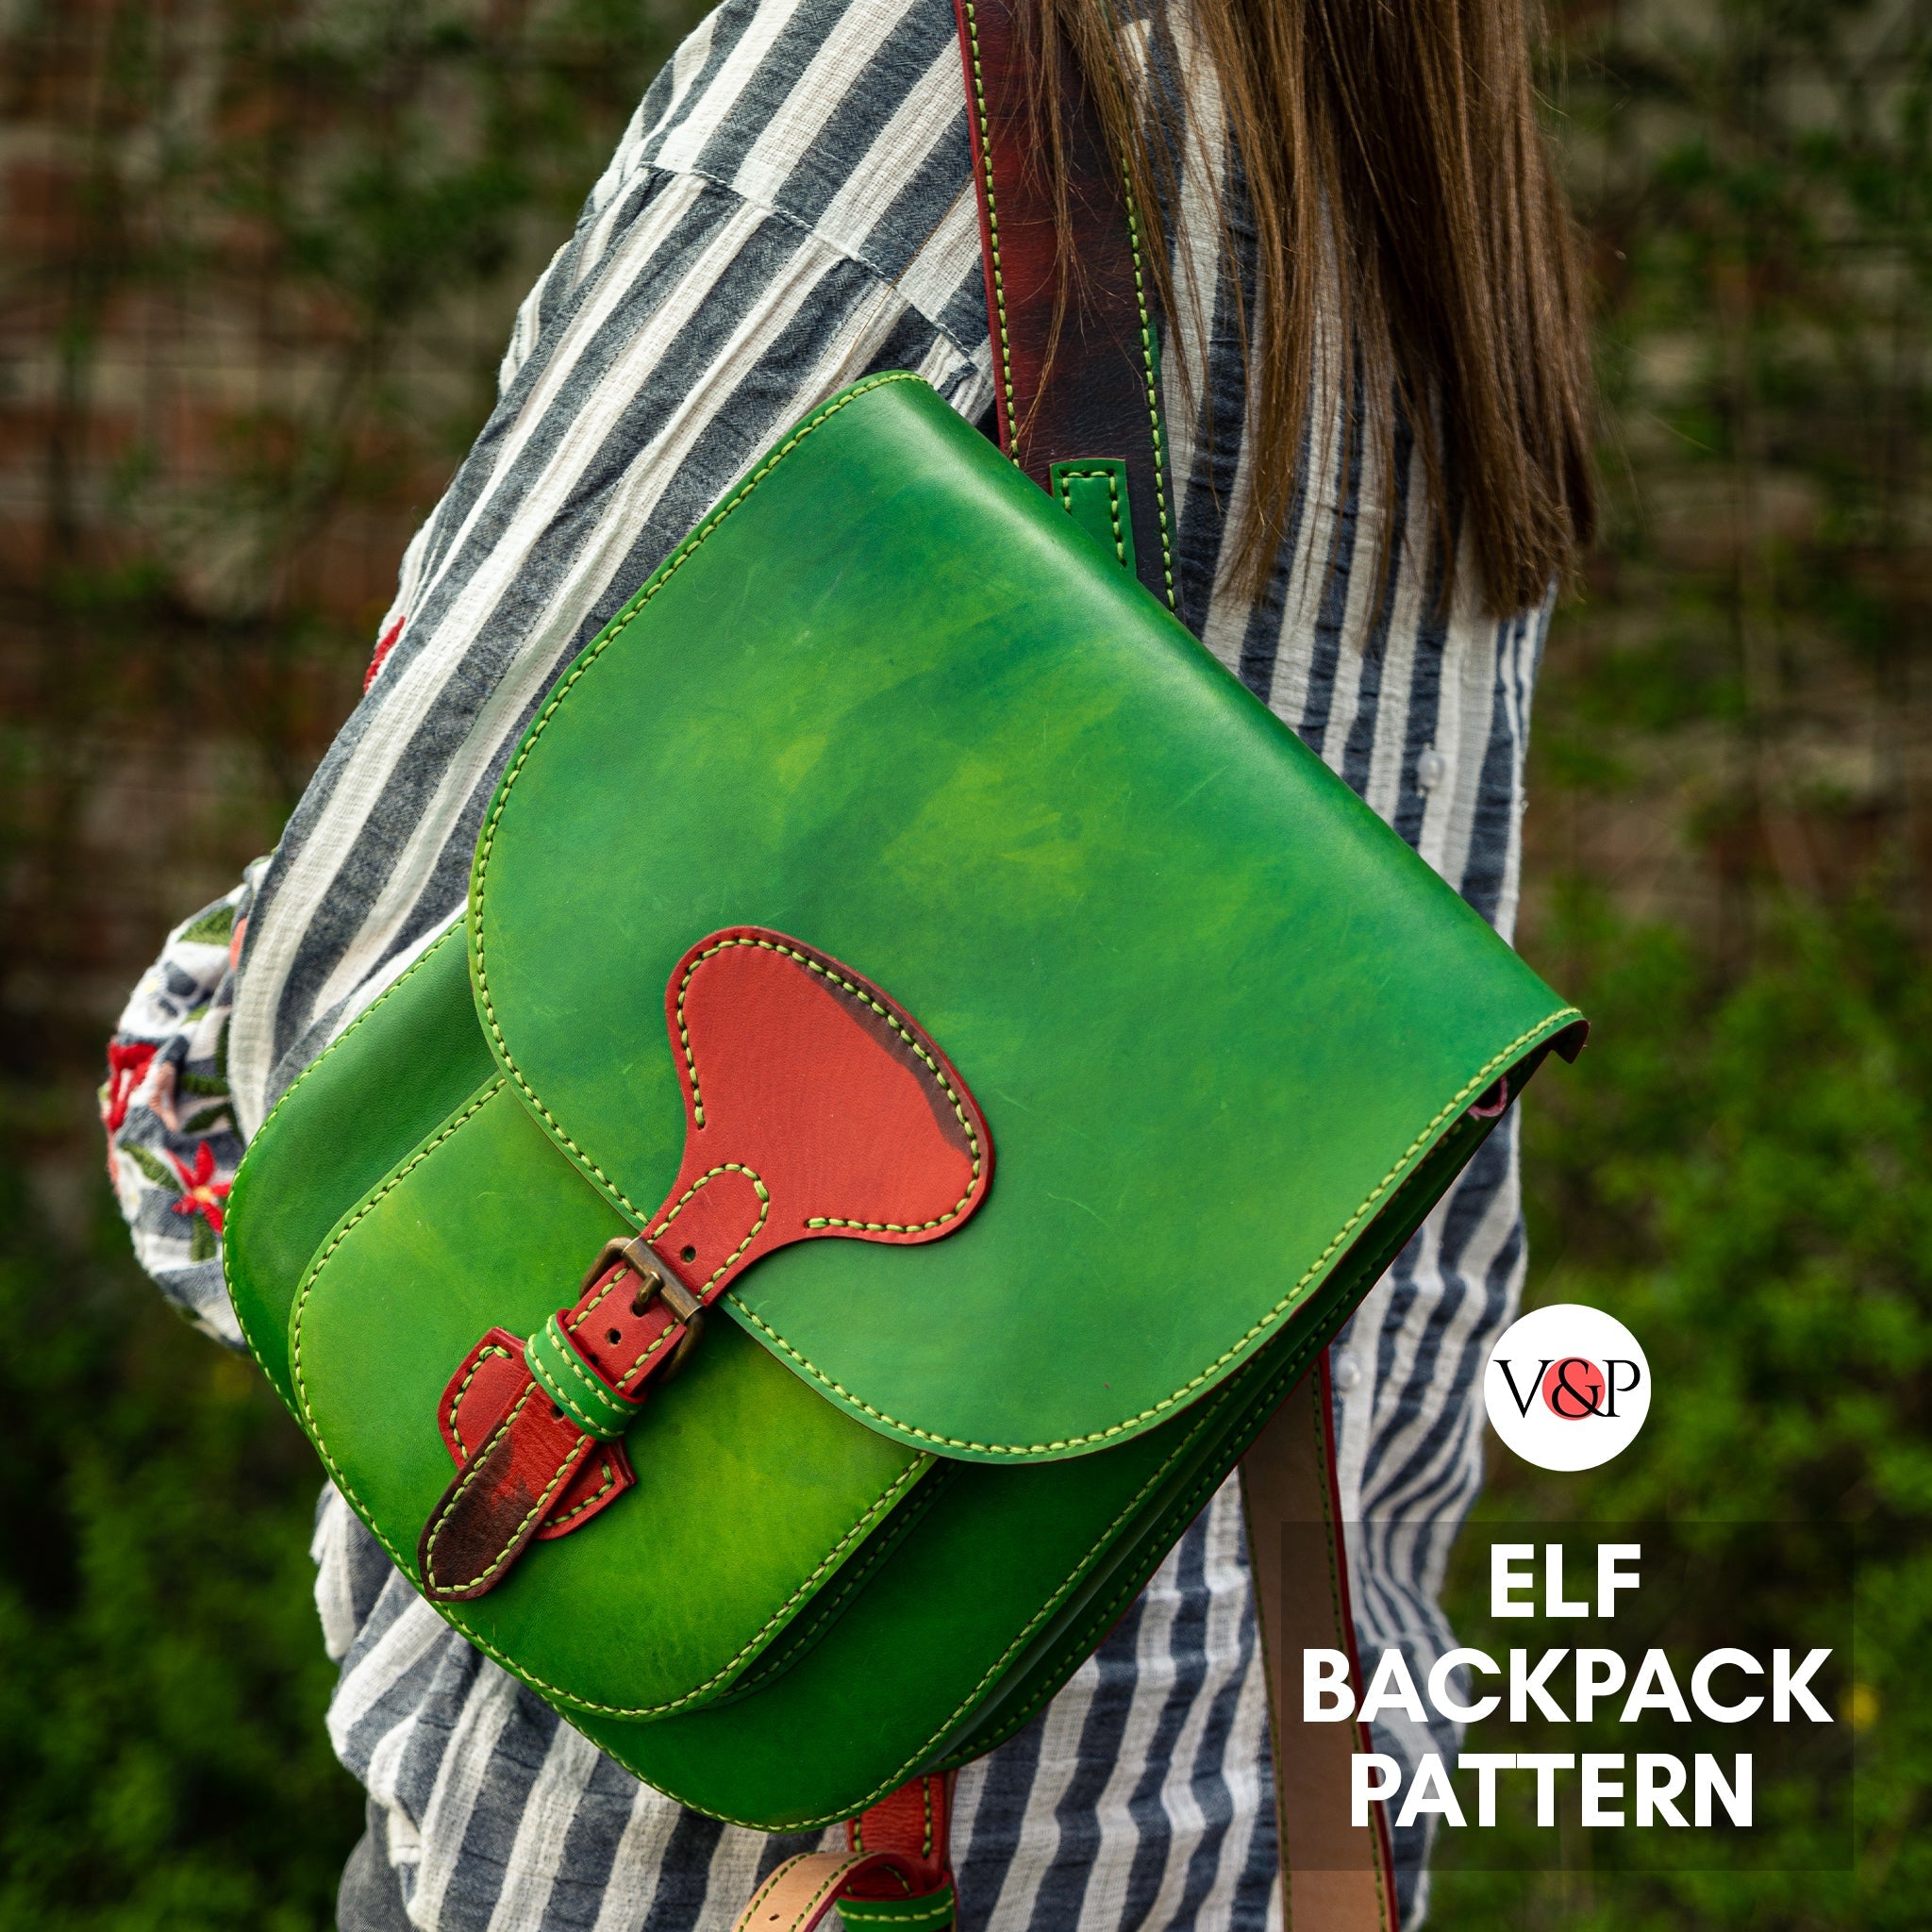 Elf Backpack, PDF Pattern and Instructional Video by Vasile and Pavel - Vasile and Pavel Leather Patterns